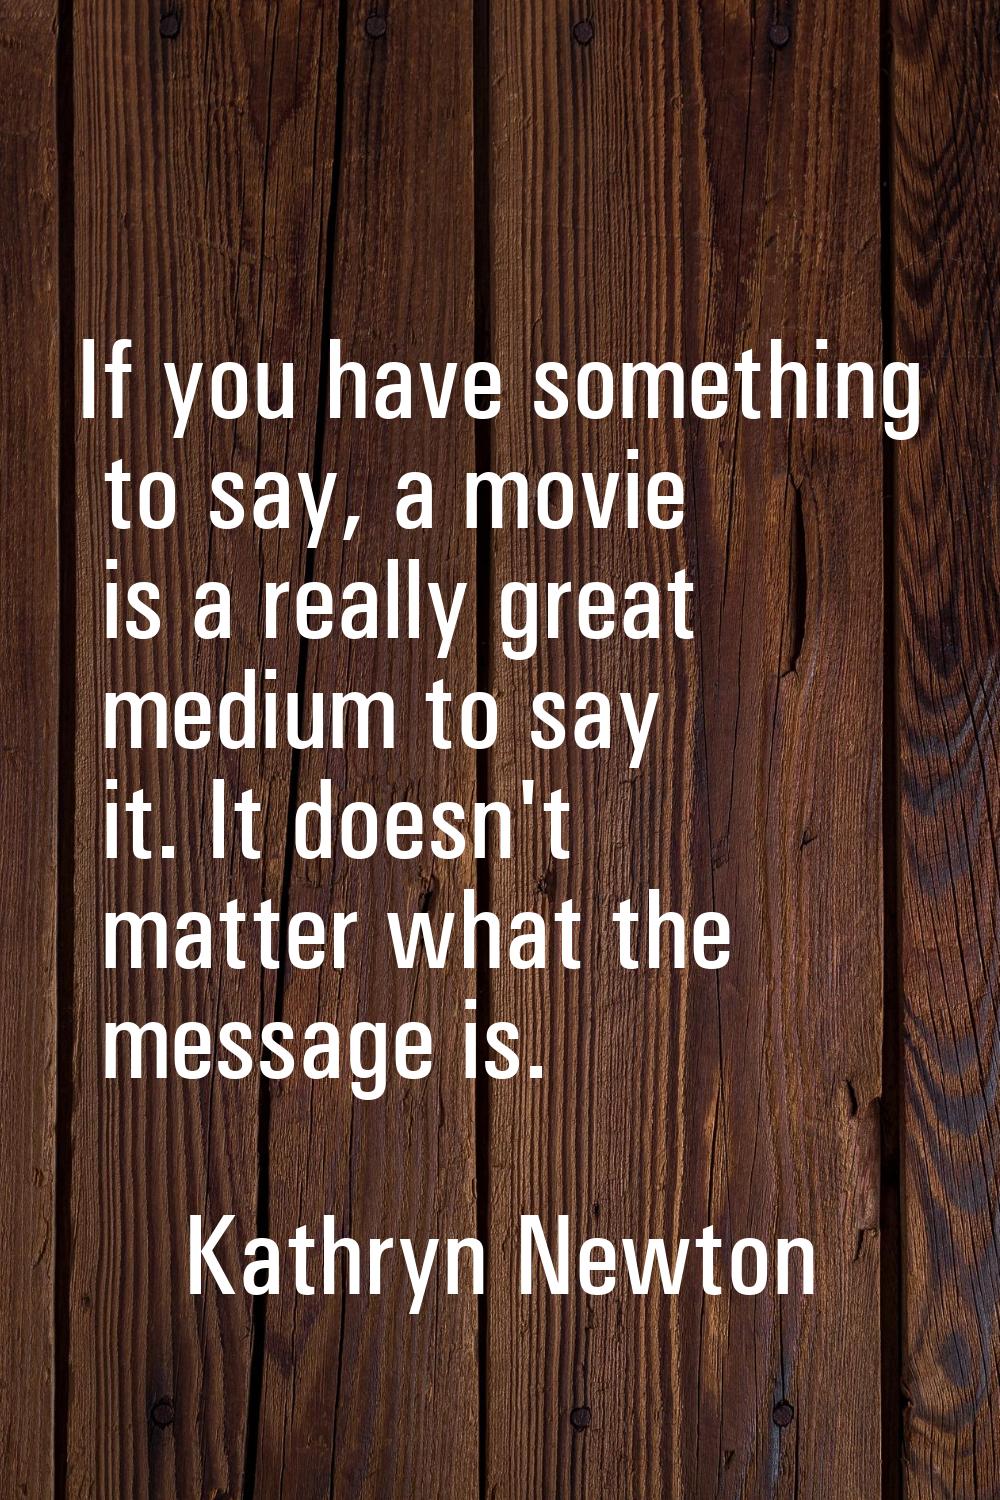 If you have something to say, a movie is a really great medium to say it. It doesn't matter what th